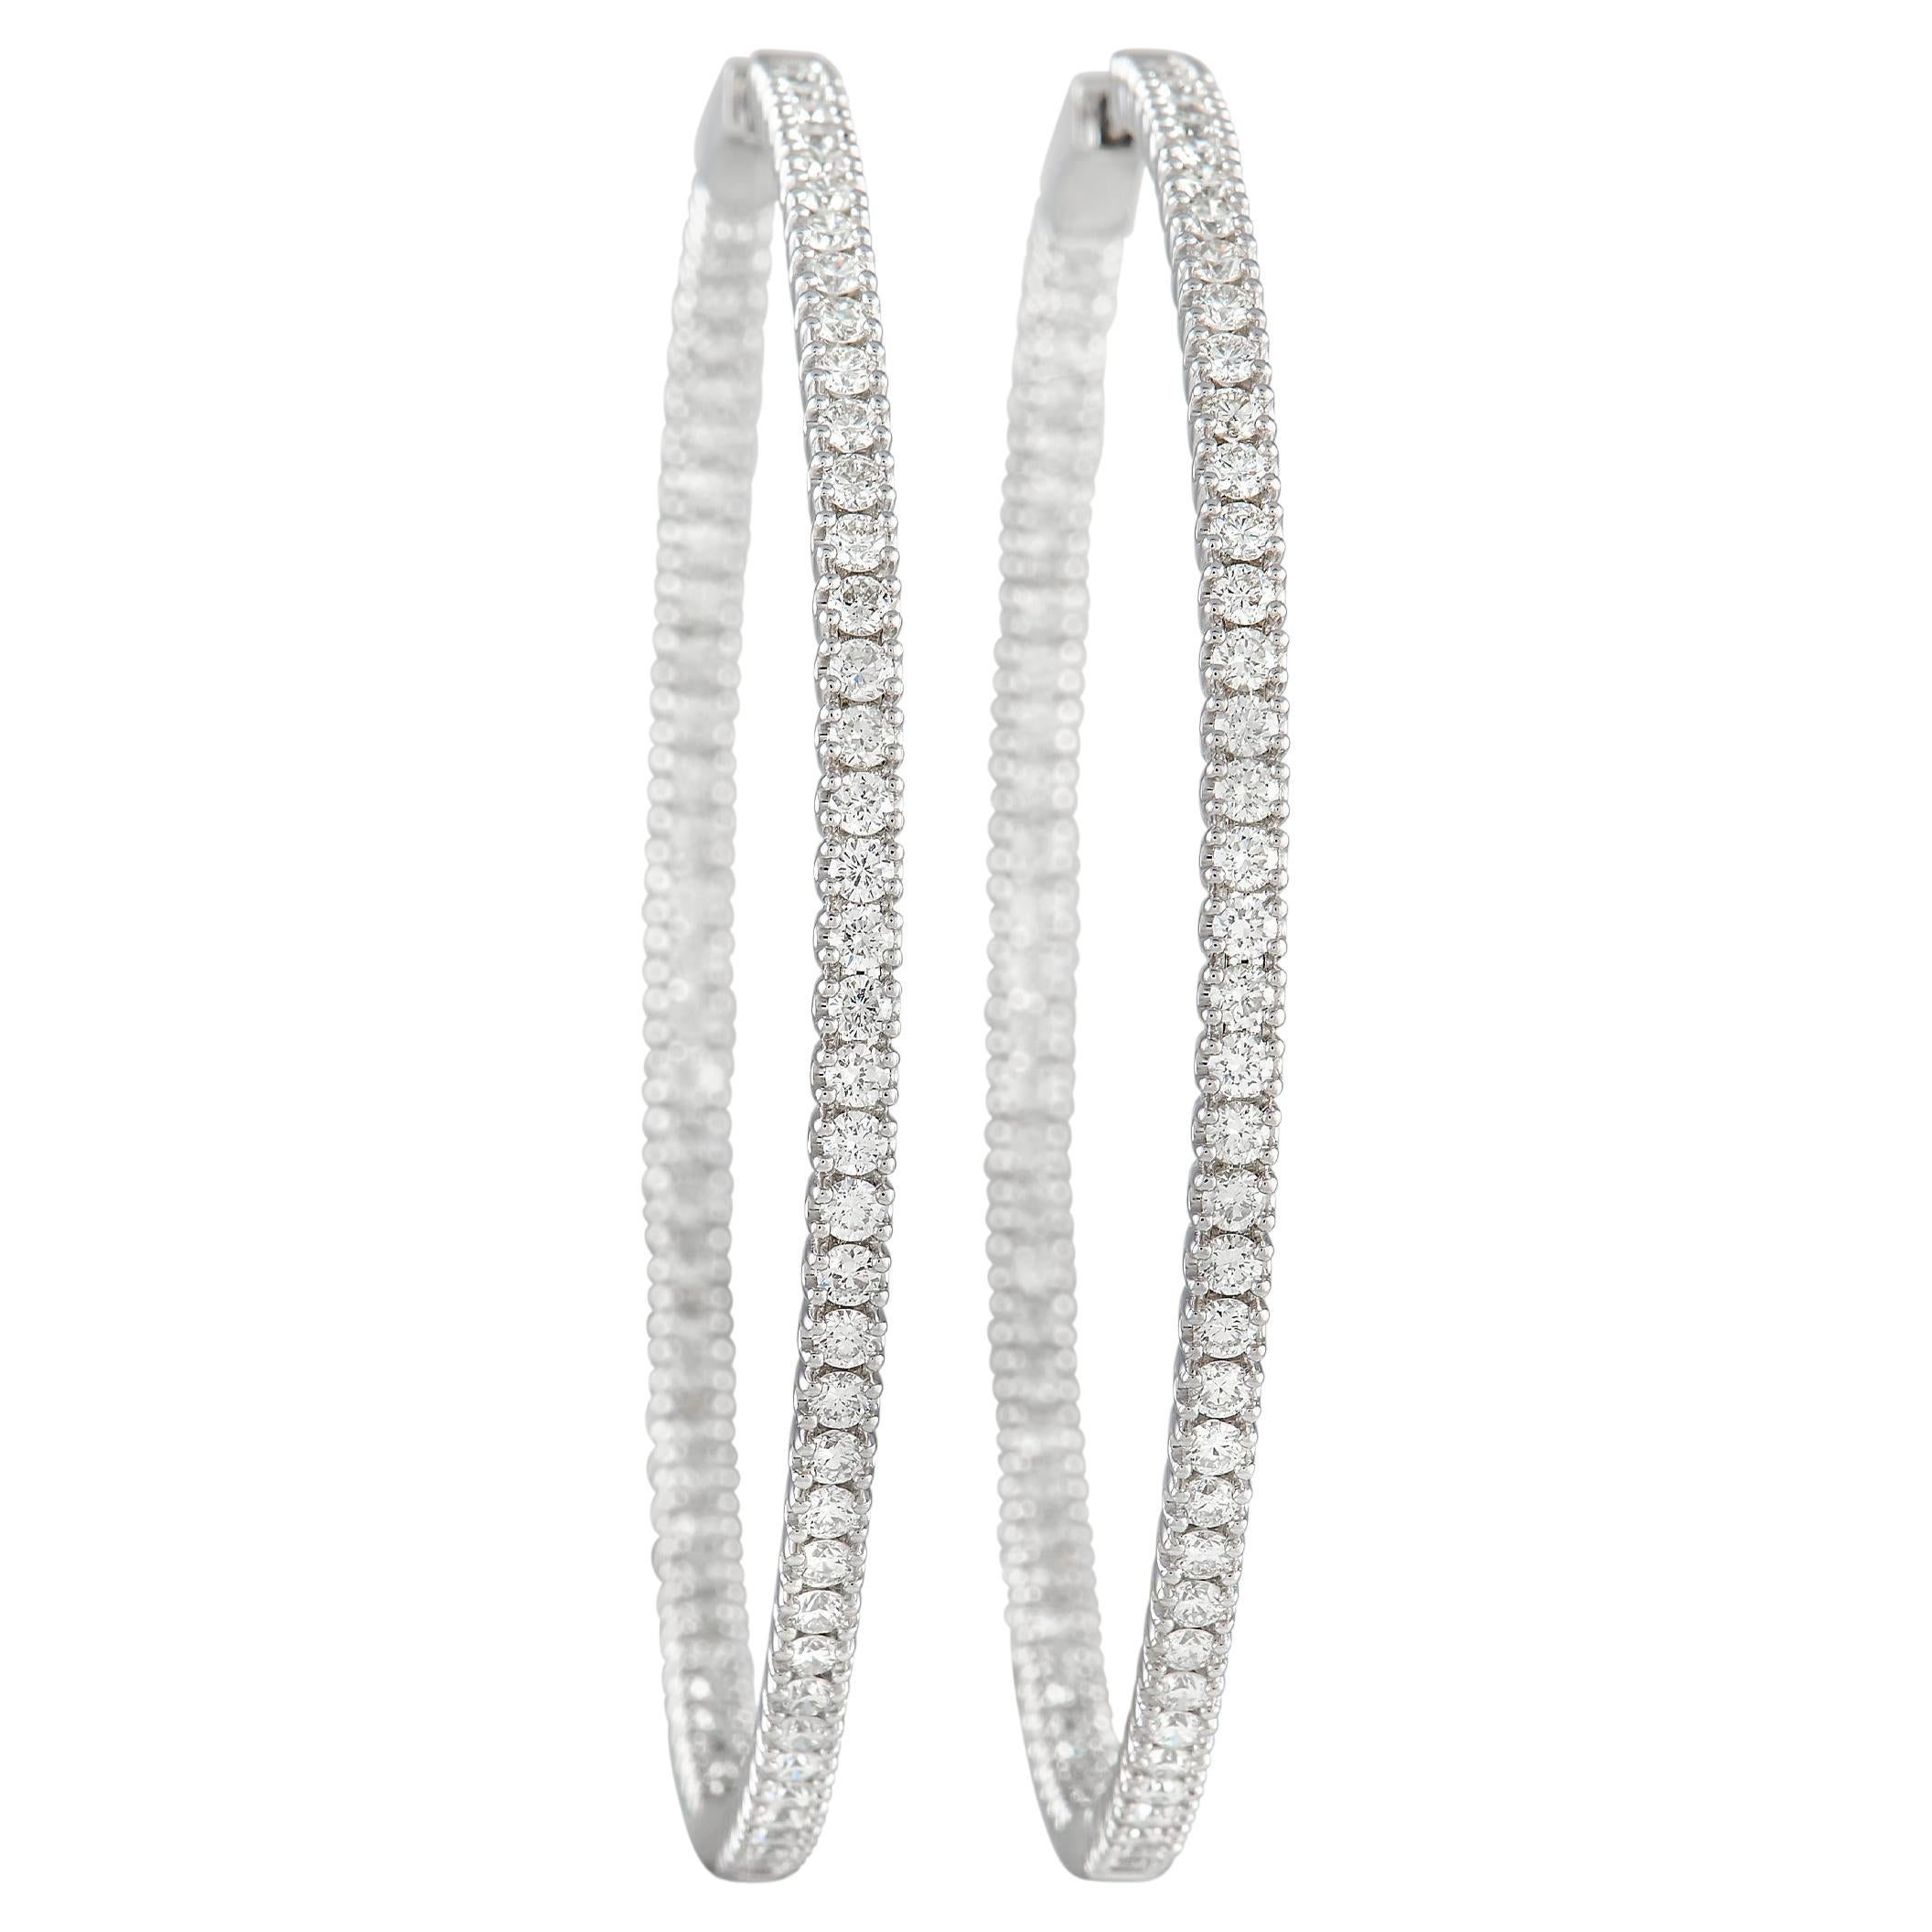 LB Exclusive 14K White Gold 3.74ct Diamond Inside-Out Hoop Earrings For Sale